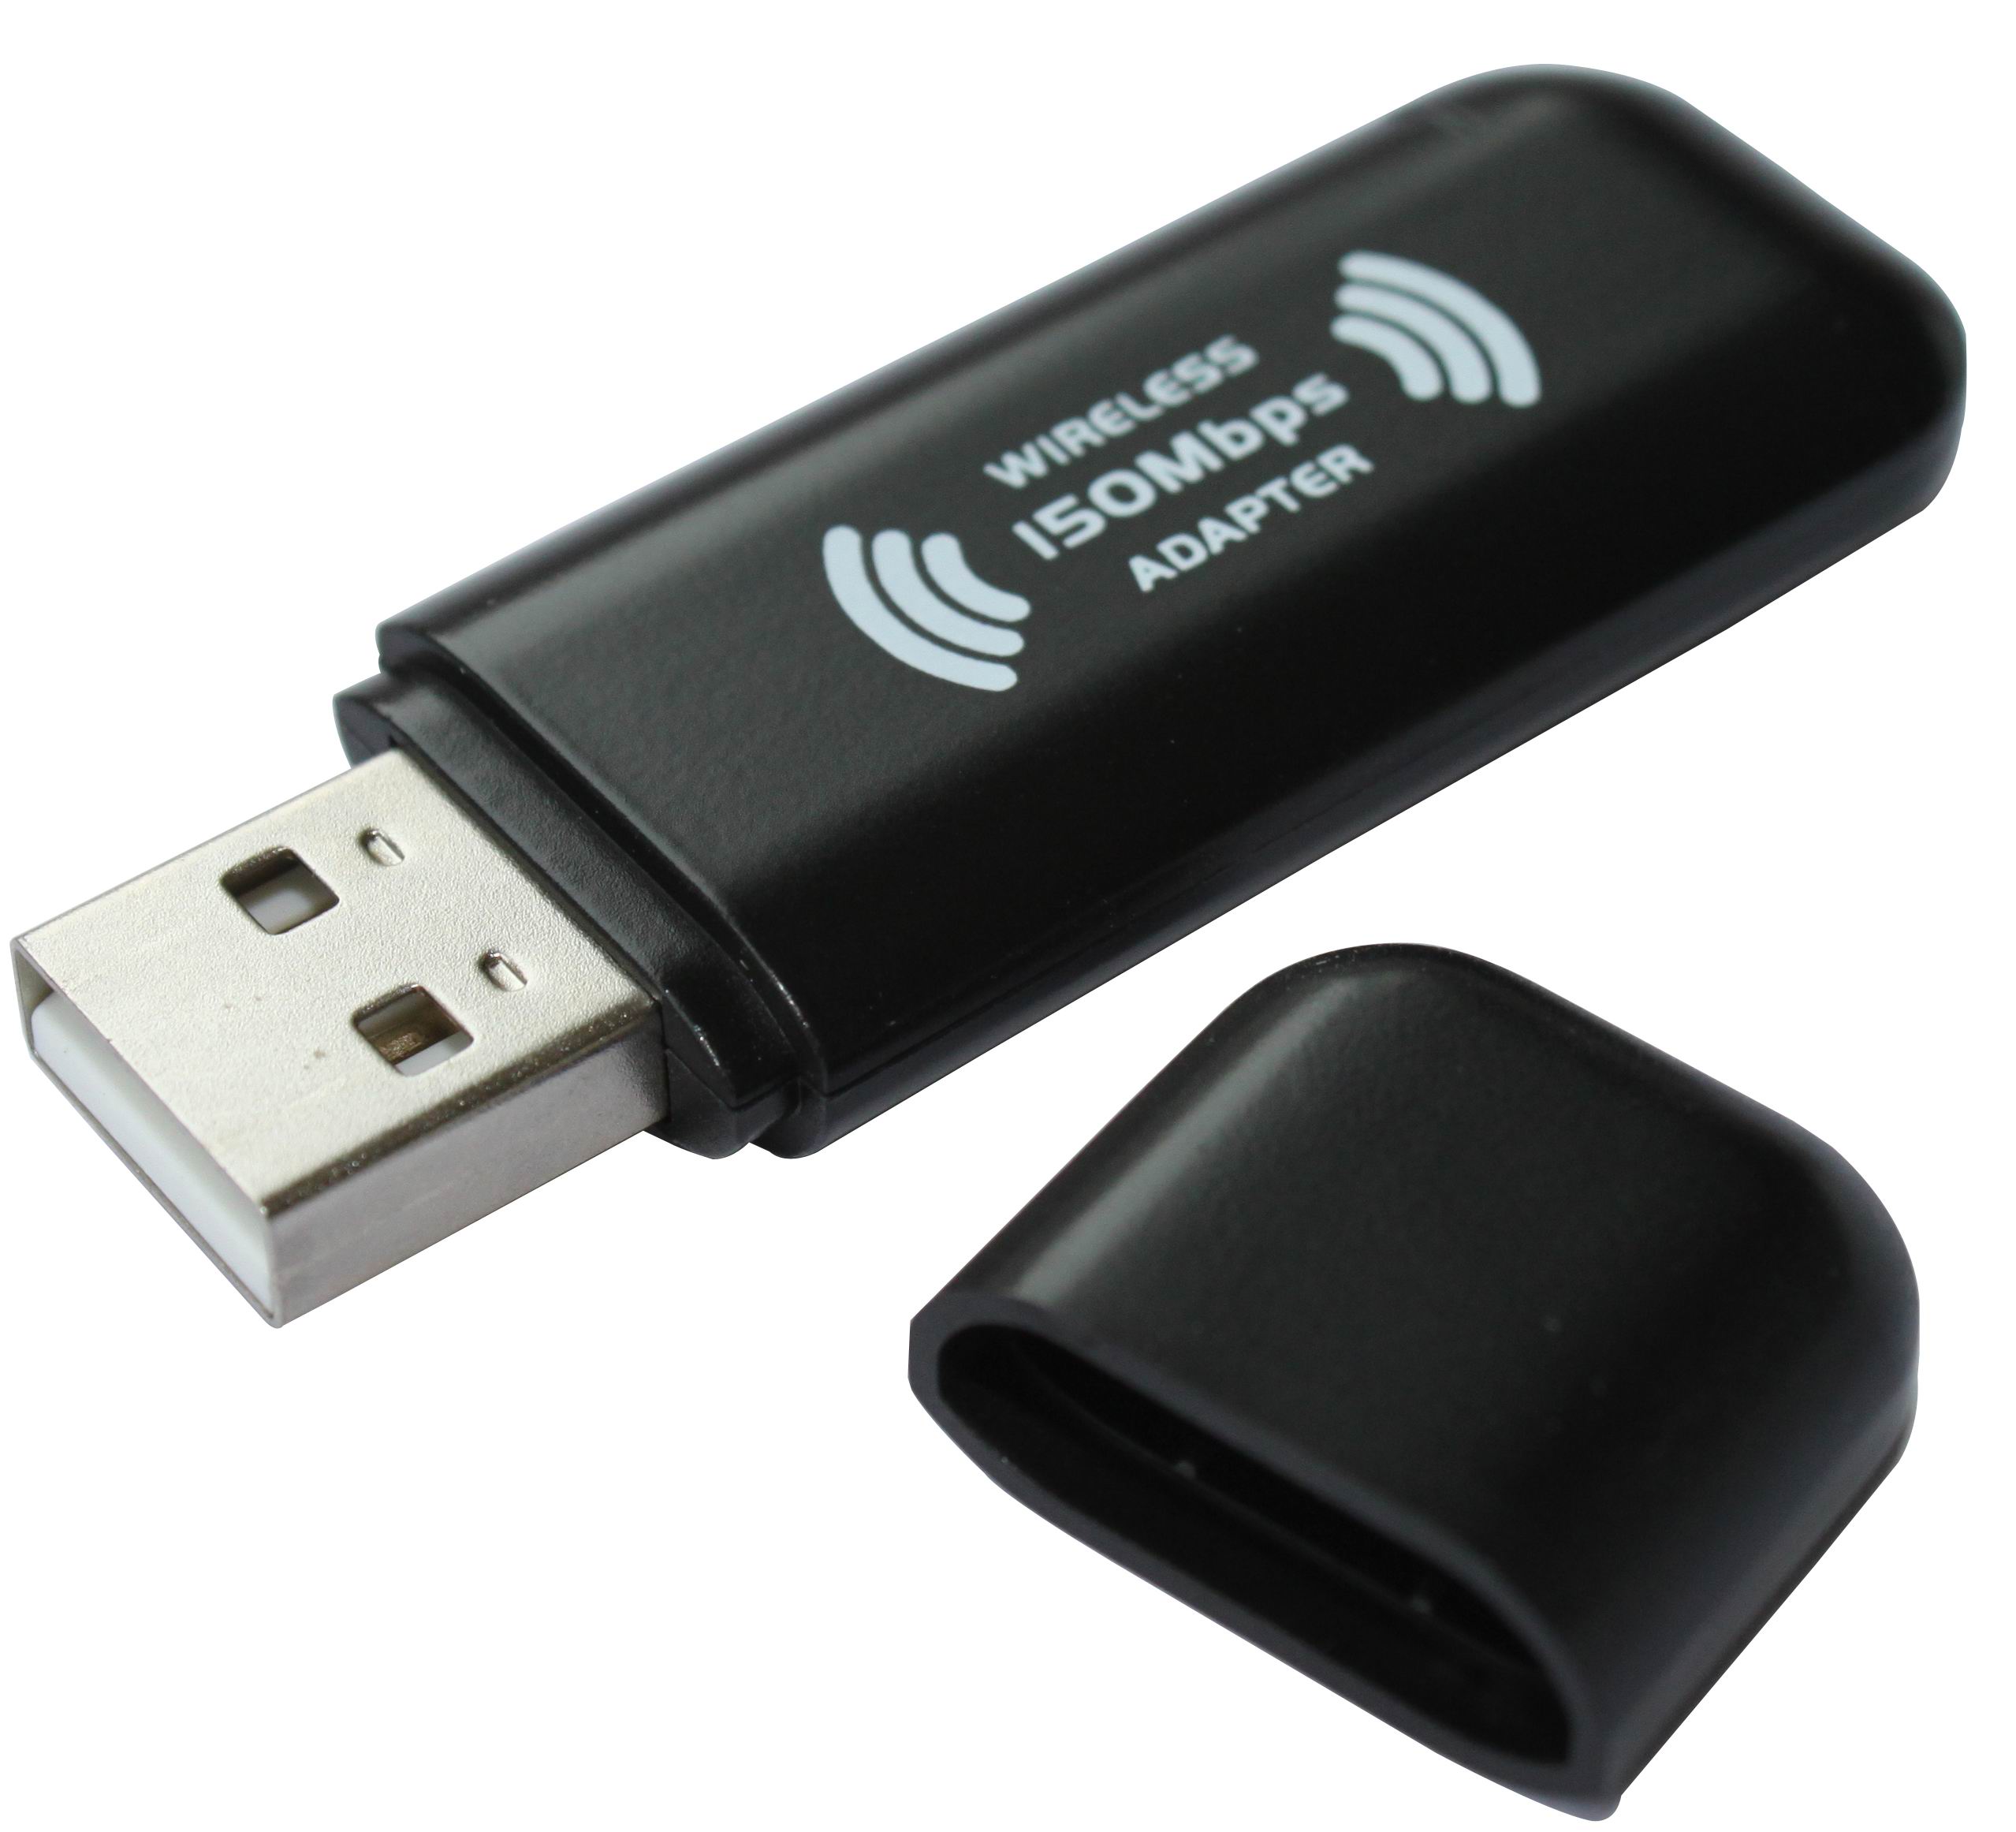 dongle adapter